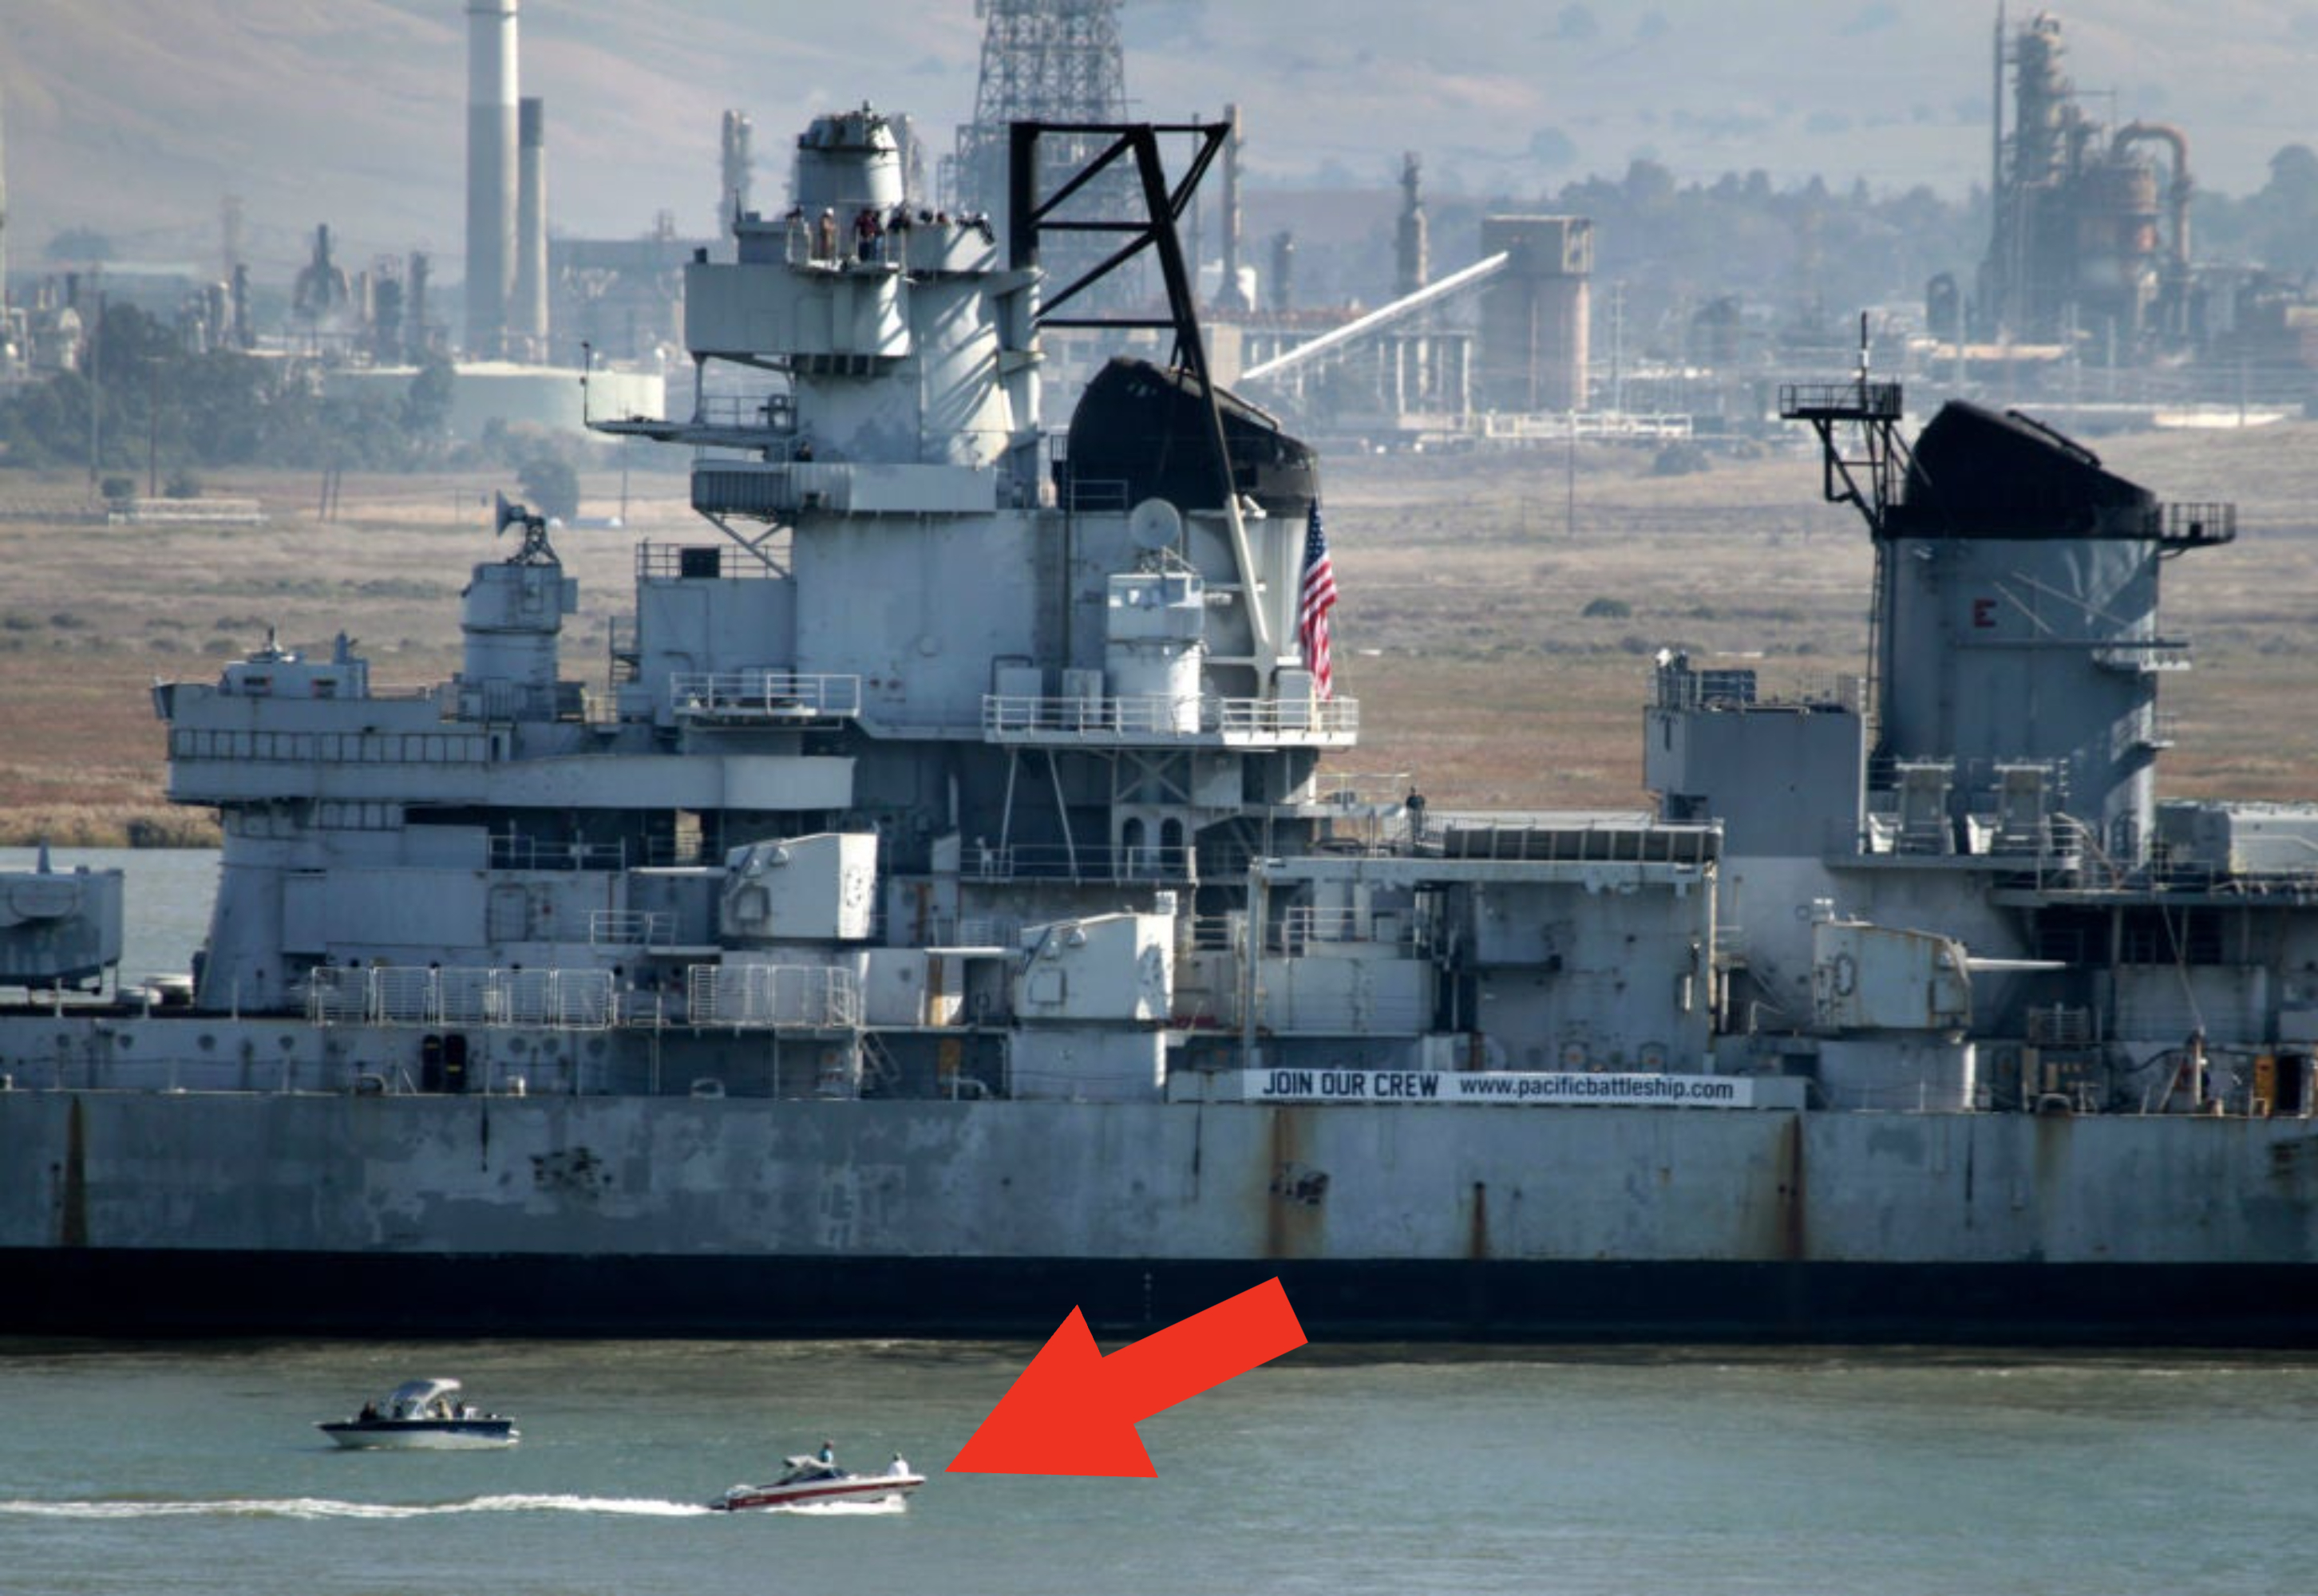 A small boat next to a battleship